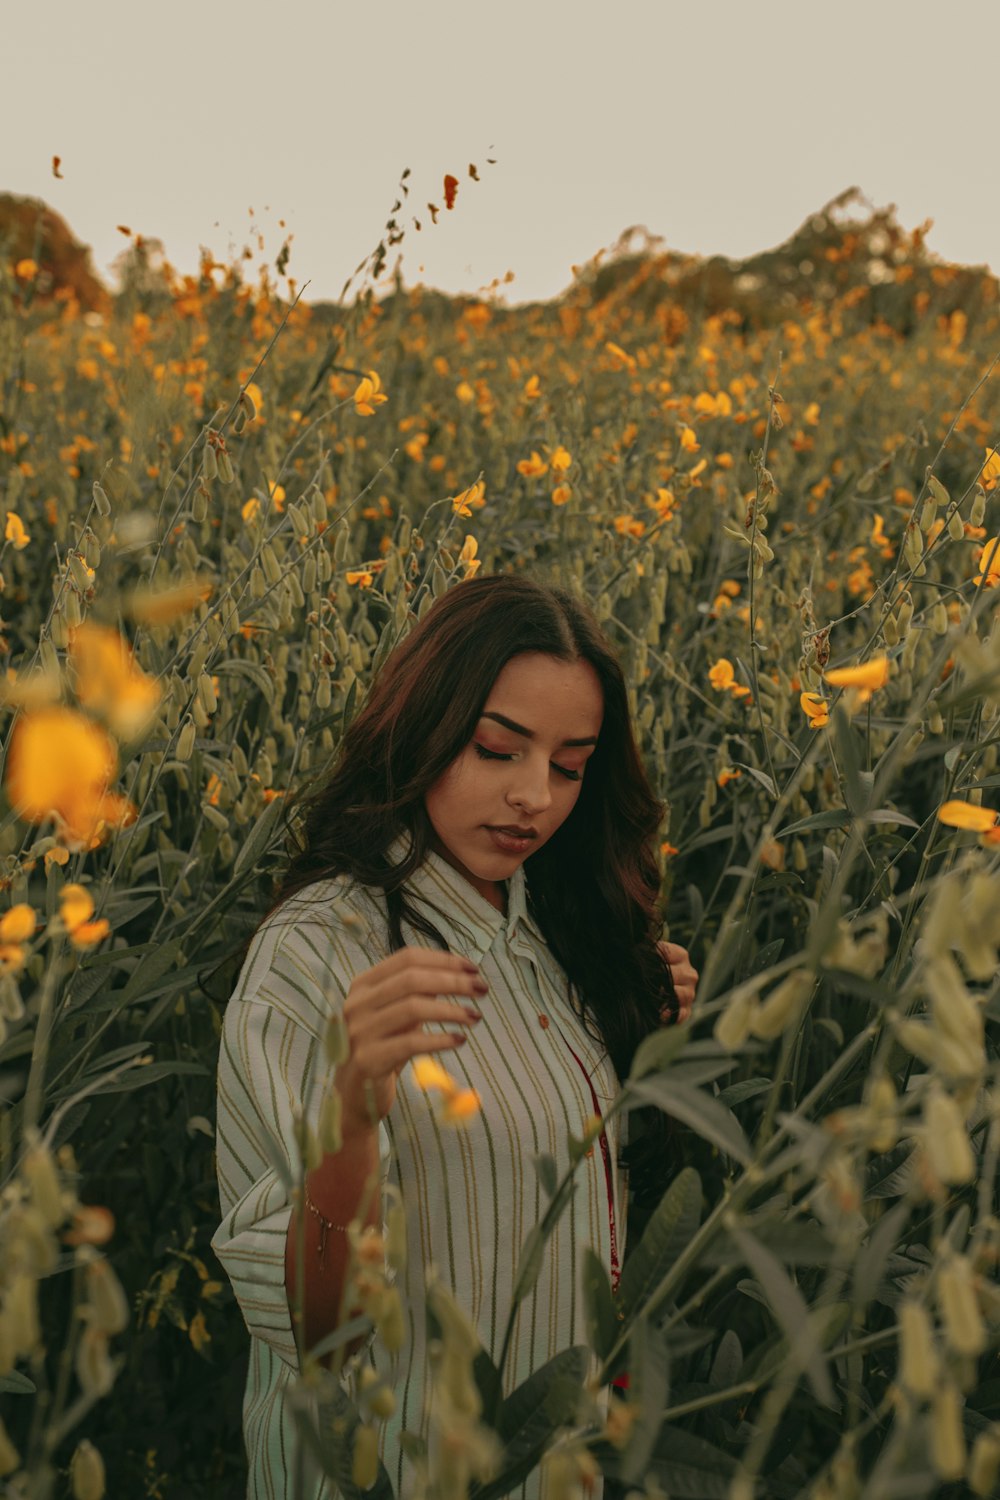 woman in pinstriped shirt standing between yellow flowers